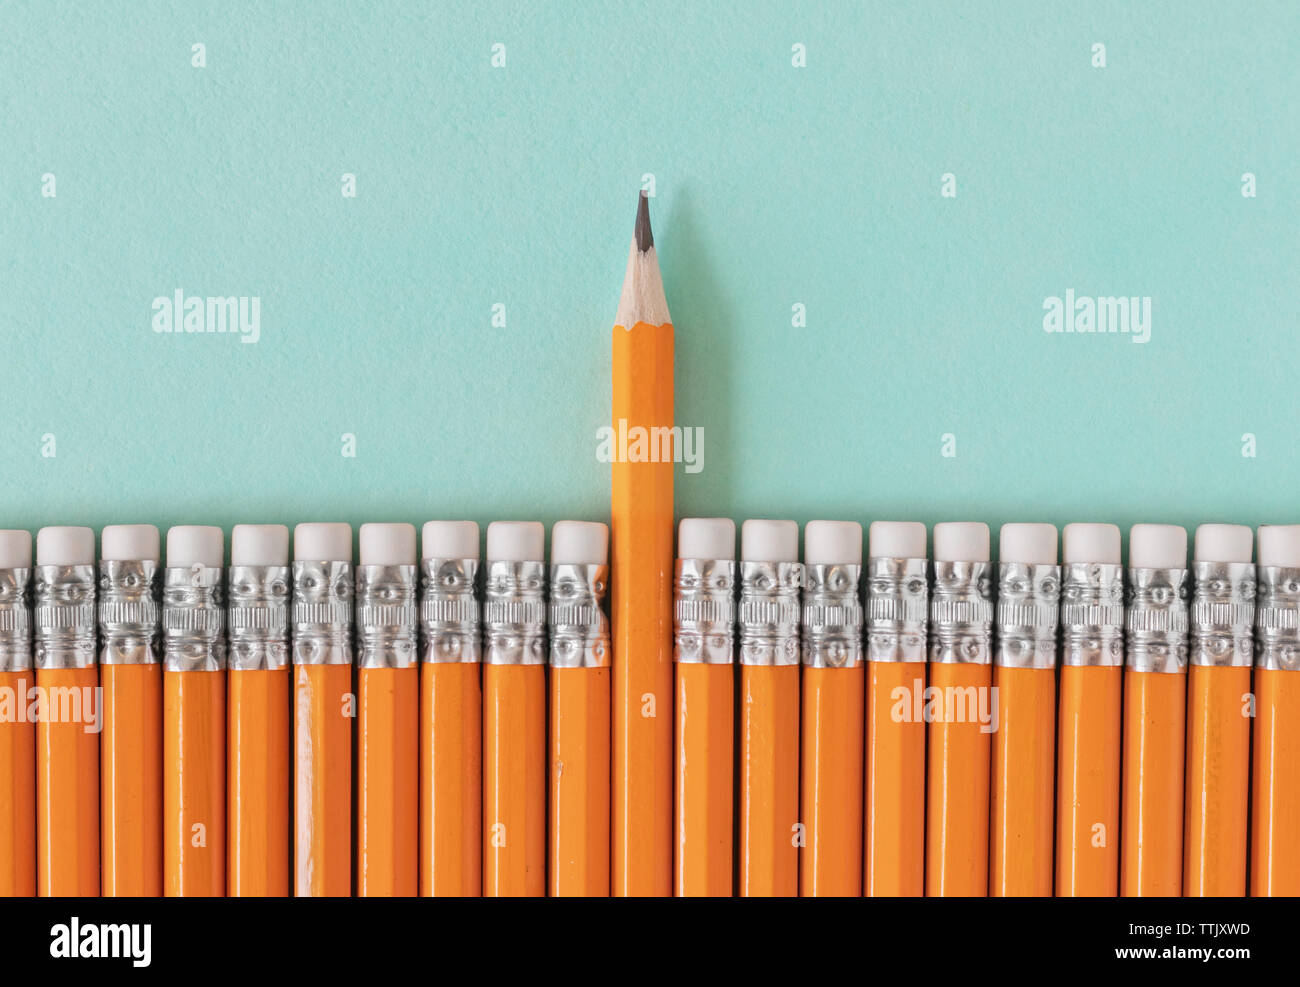 Row of orange pencils with one sharpened pencil. Leadership / standing out from a crowd concept with copy space. Stock Photo